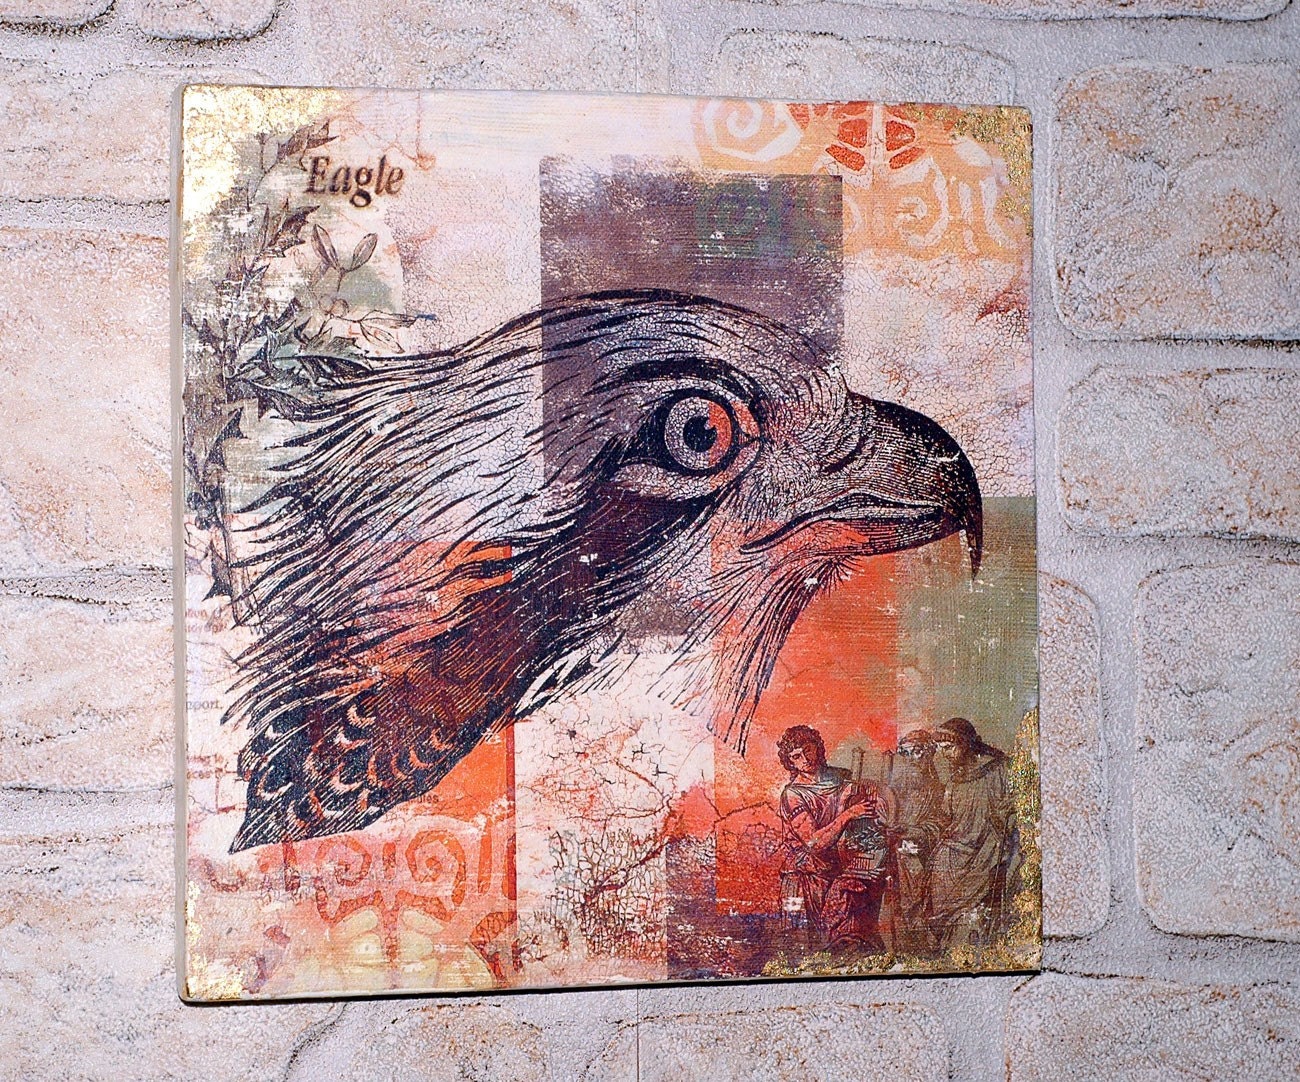 EAGLE EYE - MIXED MEDIA ART ON WOOD PANEL - SIZE 10 INCHES X 10 INCHES - recycled  wood panel - PAINTING ,ACRYLICS,GOLD LEAFING AND silkscreen - One of a Kind Art